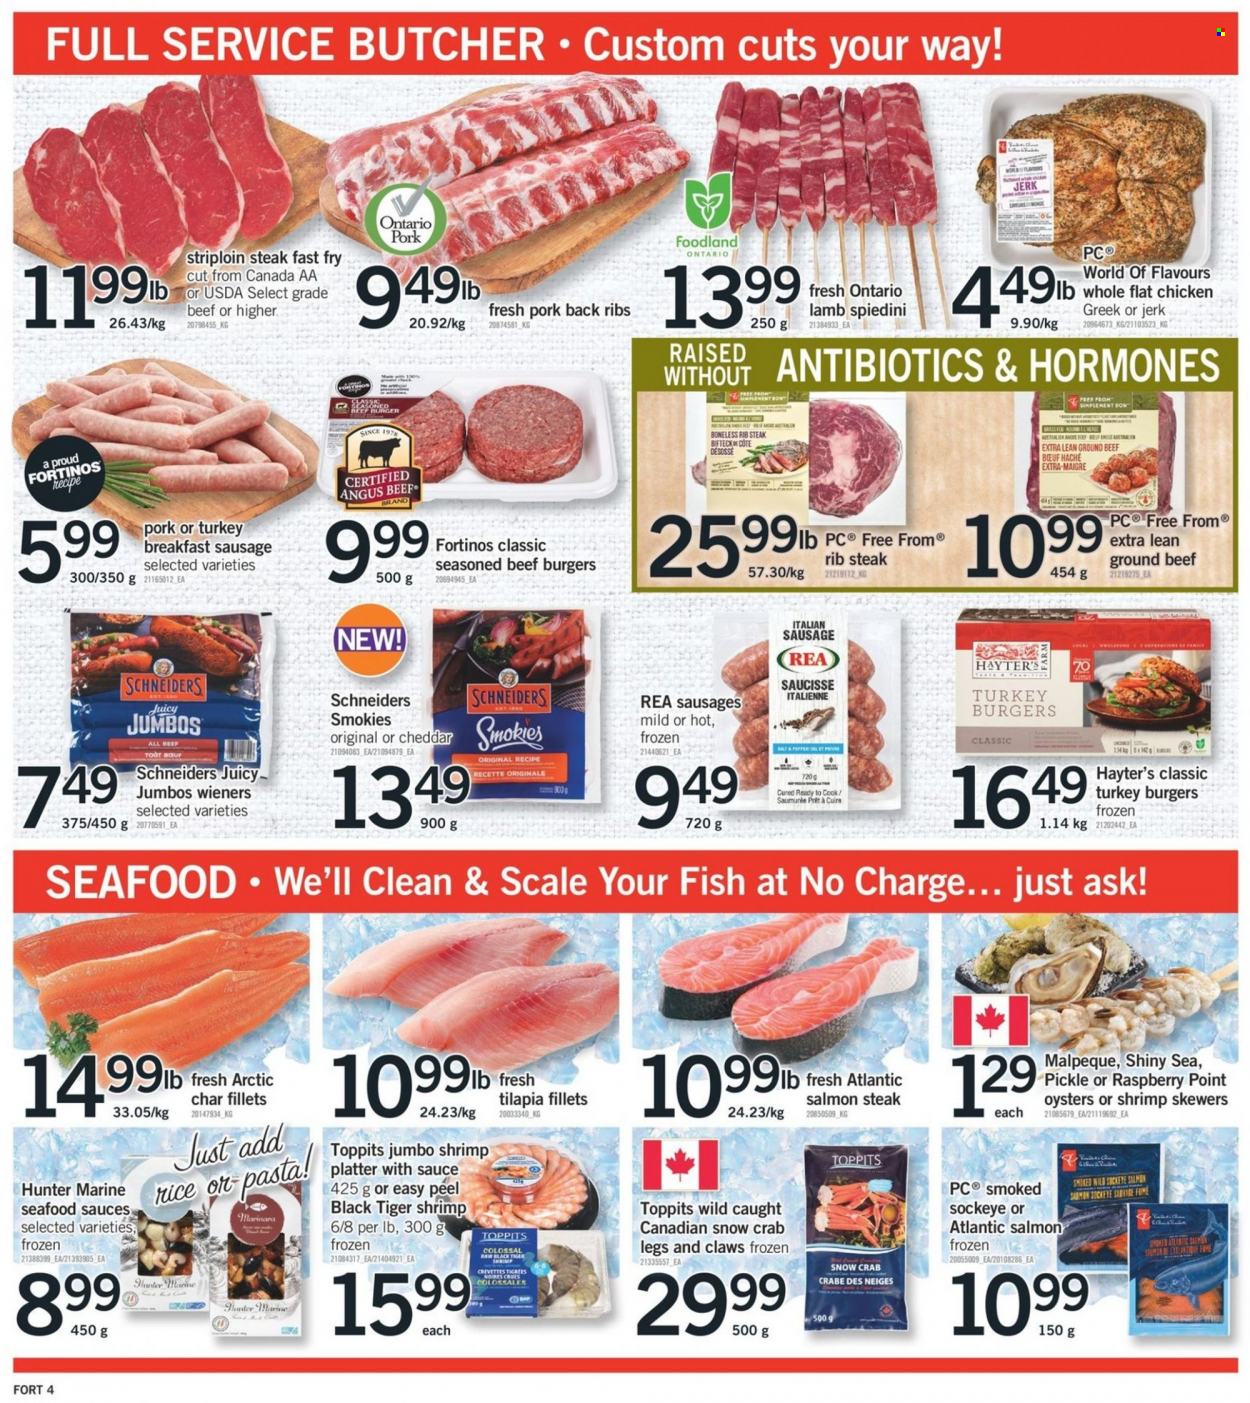 thumbnail - Fortinos Flyer - May 19, 2022 - May 25, 2022 - Sales products - scale, salmon, tilapia, oysters, seafood, crab, fish, shrimps, hamburger, pasta, beef burger, sausage, italian sausage, cheese, rice, beef meat, ground beef, striploin steak, turkey burger, pork meat, pork ribs, pork back ribs, Hunter, steak. Page 5.